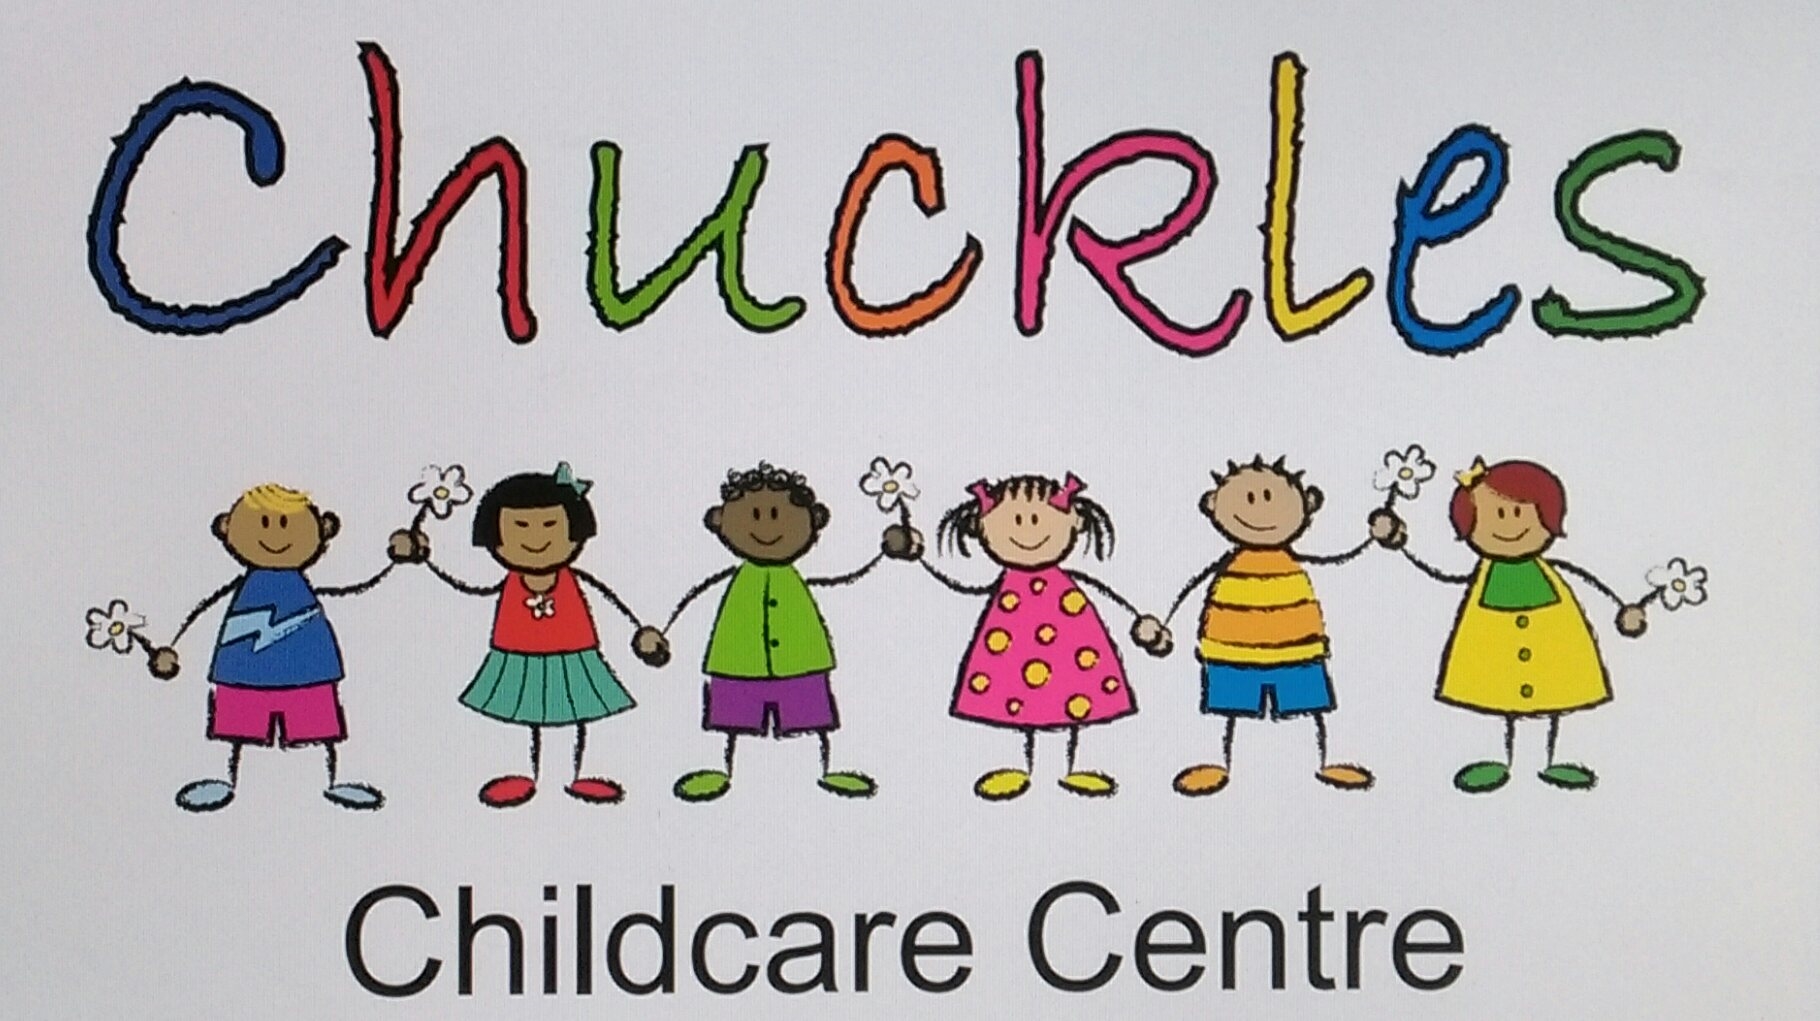 Chuckles Childcare Centre & Early Learning